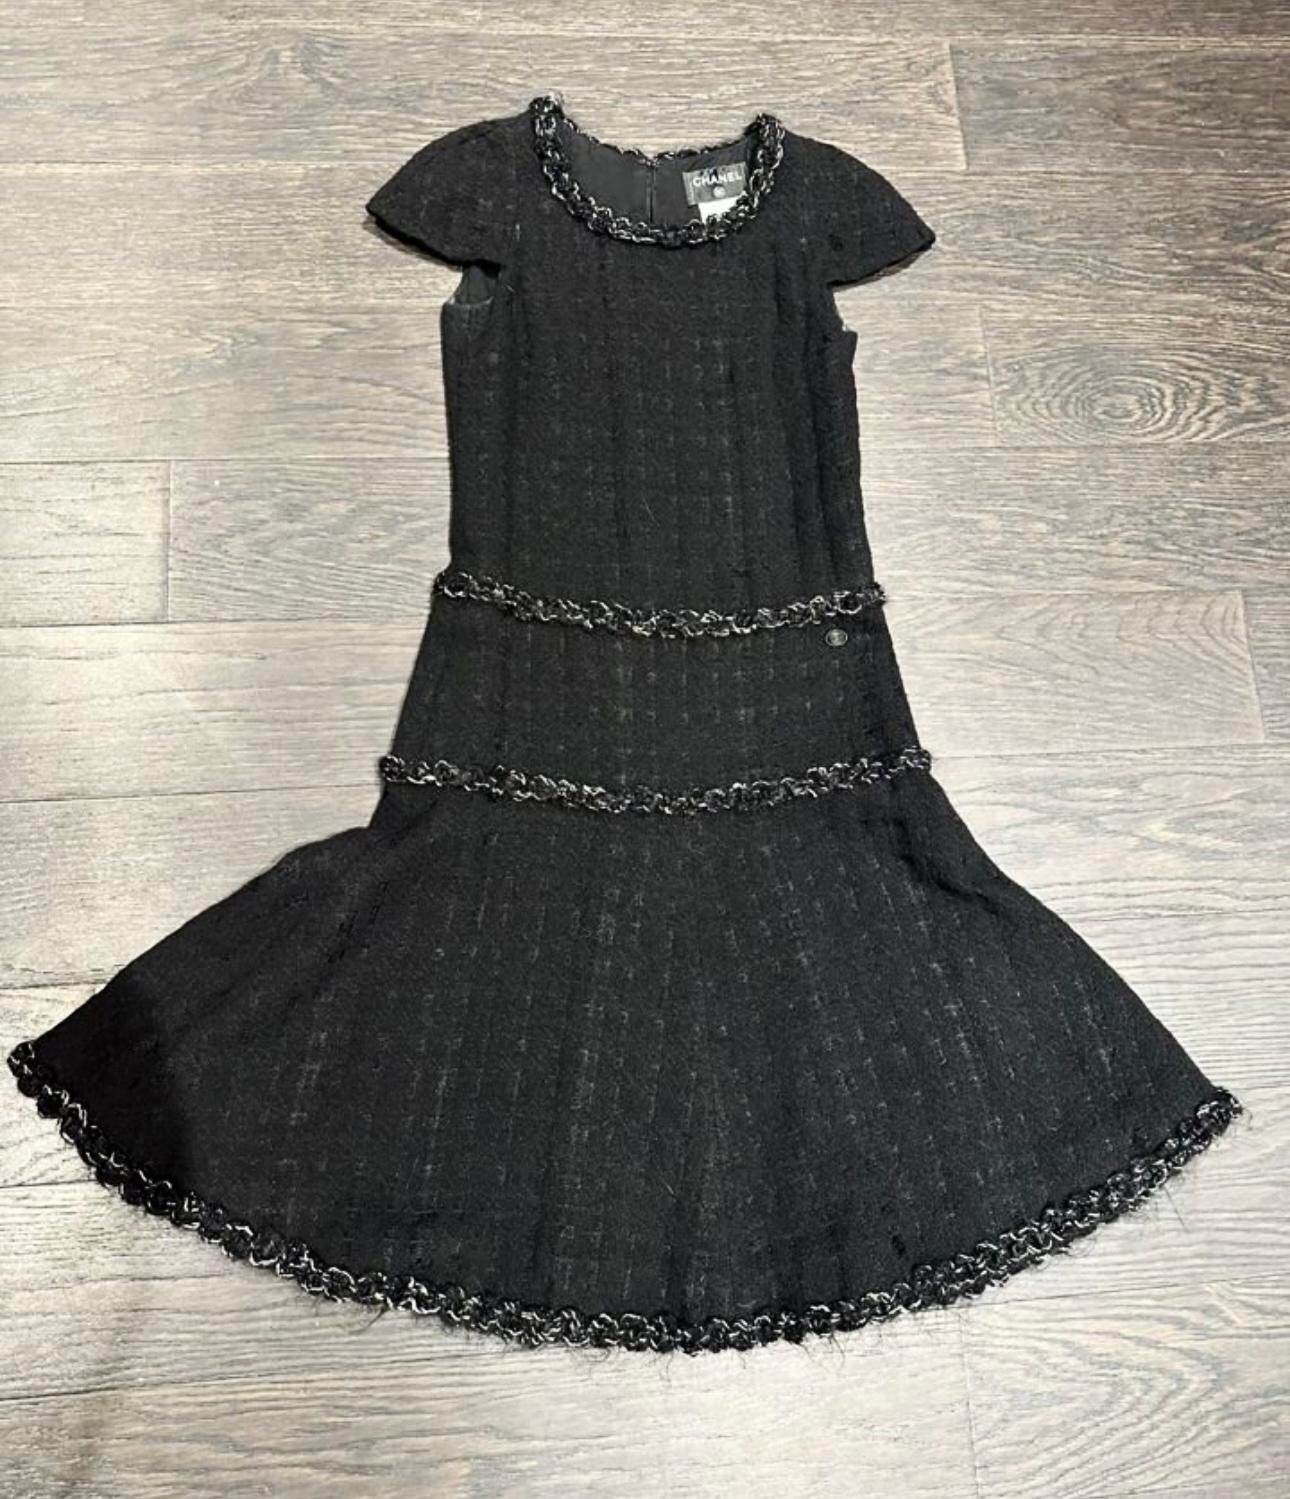 Absolutely timeless Chanel little black tweed dress with CC logo charm at waist.
Unmistakably 'CHANEL' silhouette
- black silk lining
Size mark 34 FR. Condition is pristine, no signs of wear.